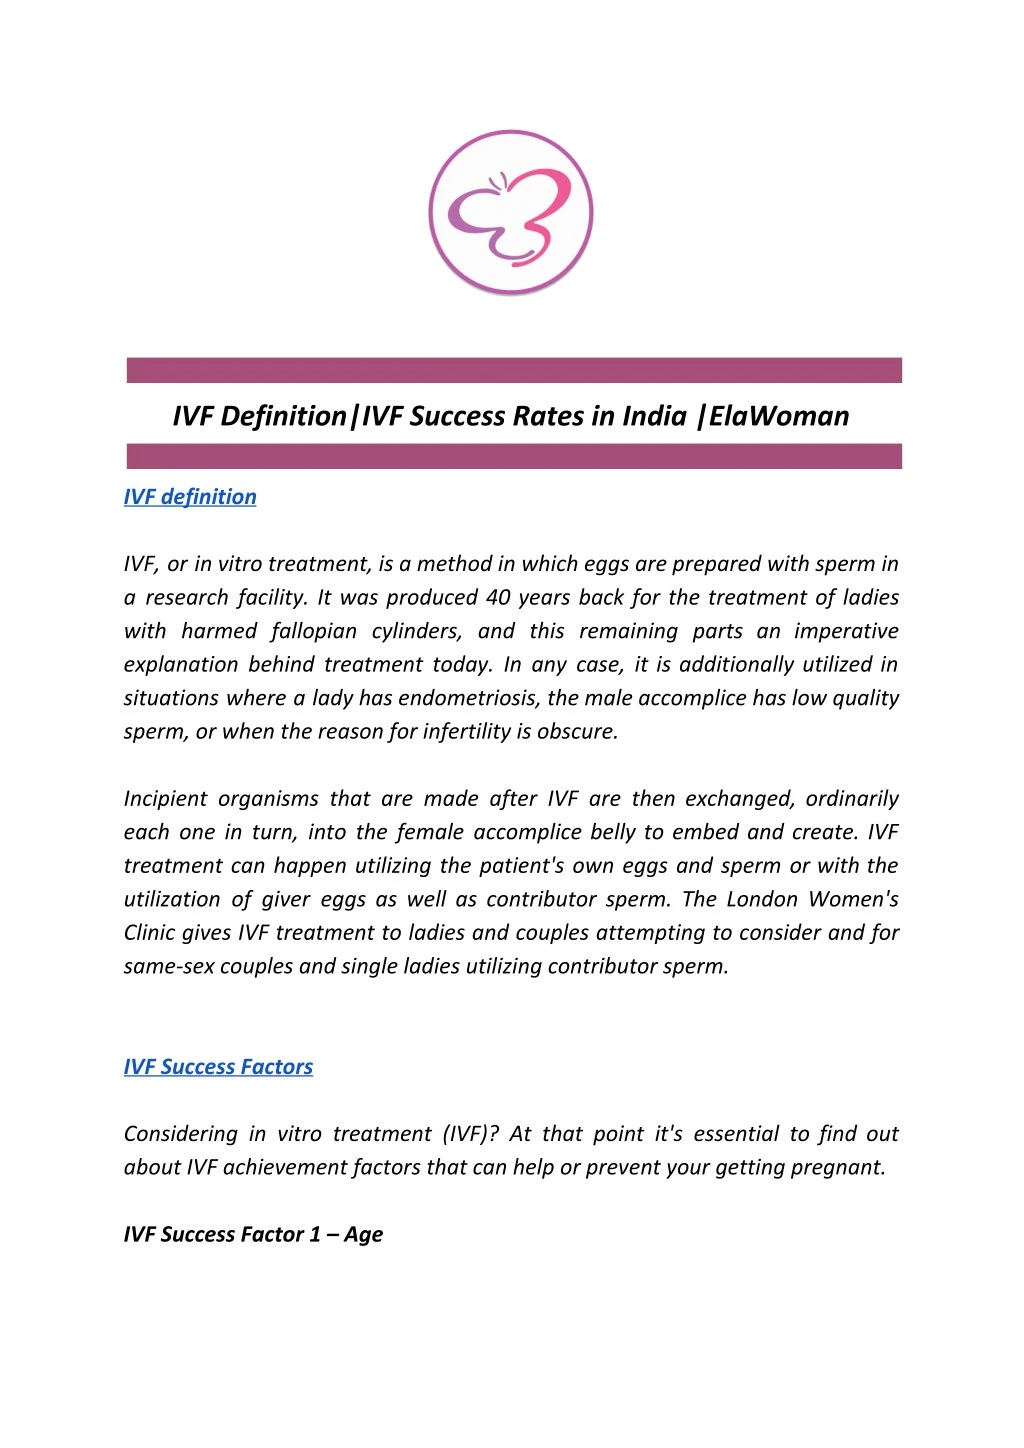 ivf definition ivf success rates in india elawoman